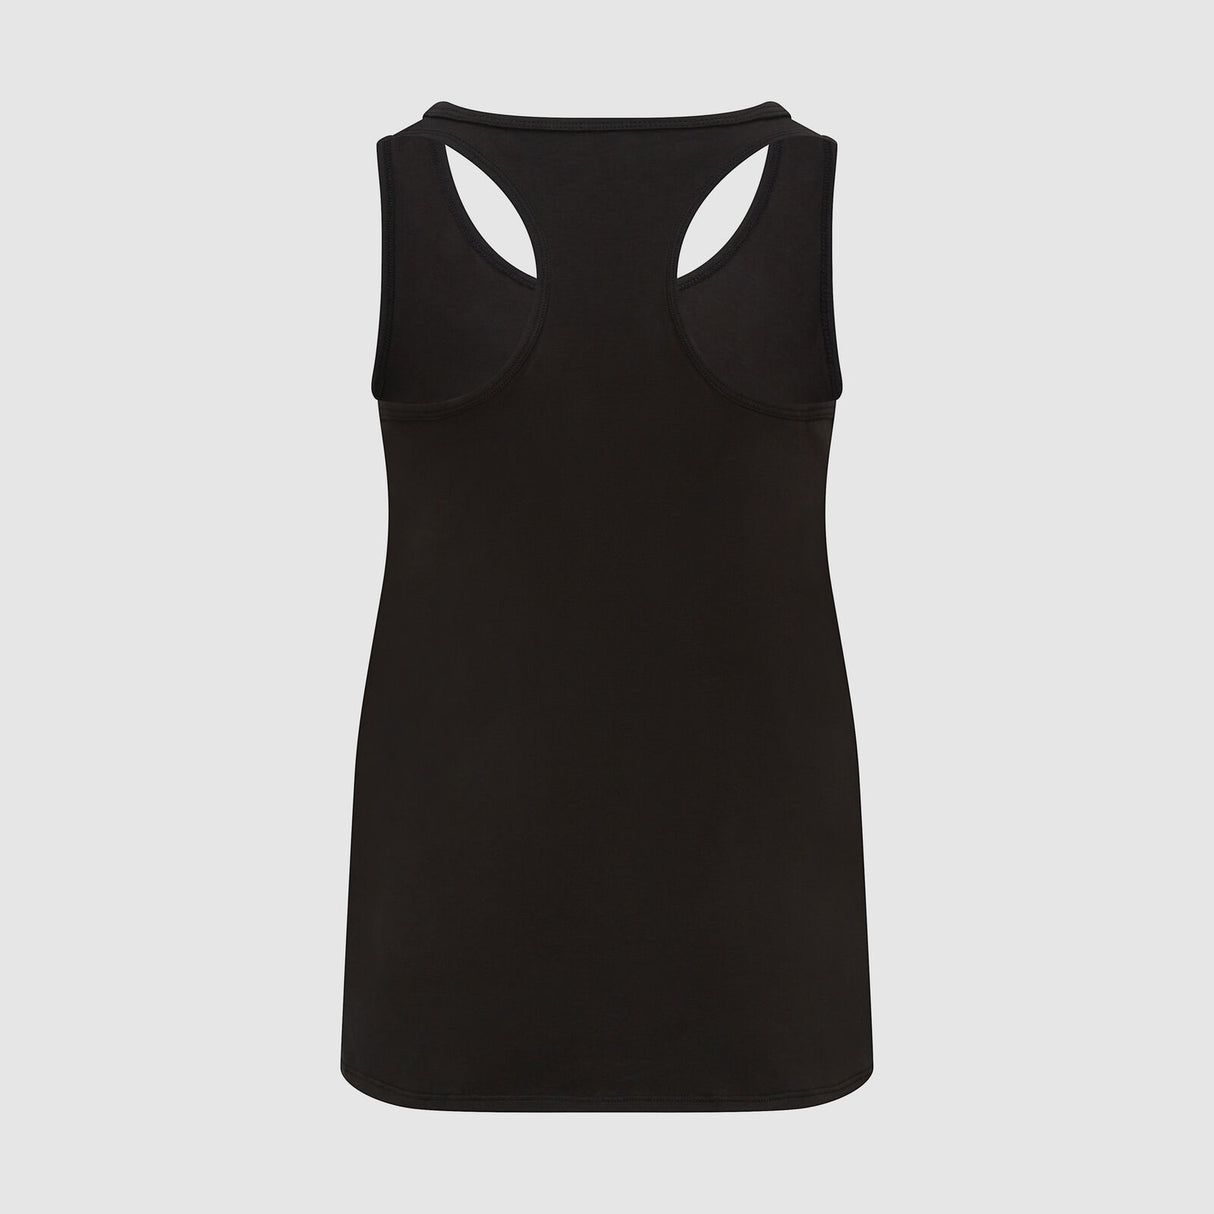 Mercedes, Mujer, Stealth Racerback, Negro